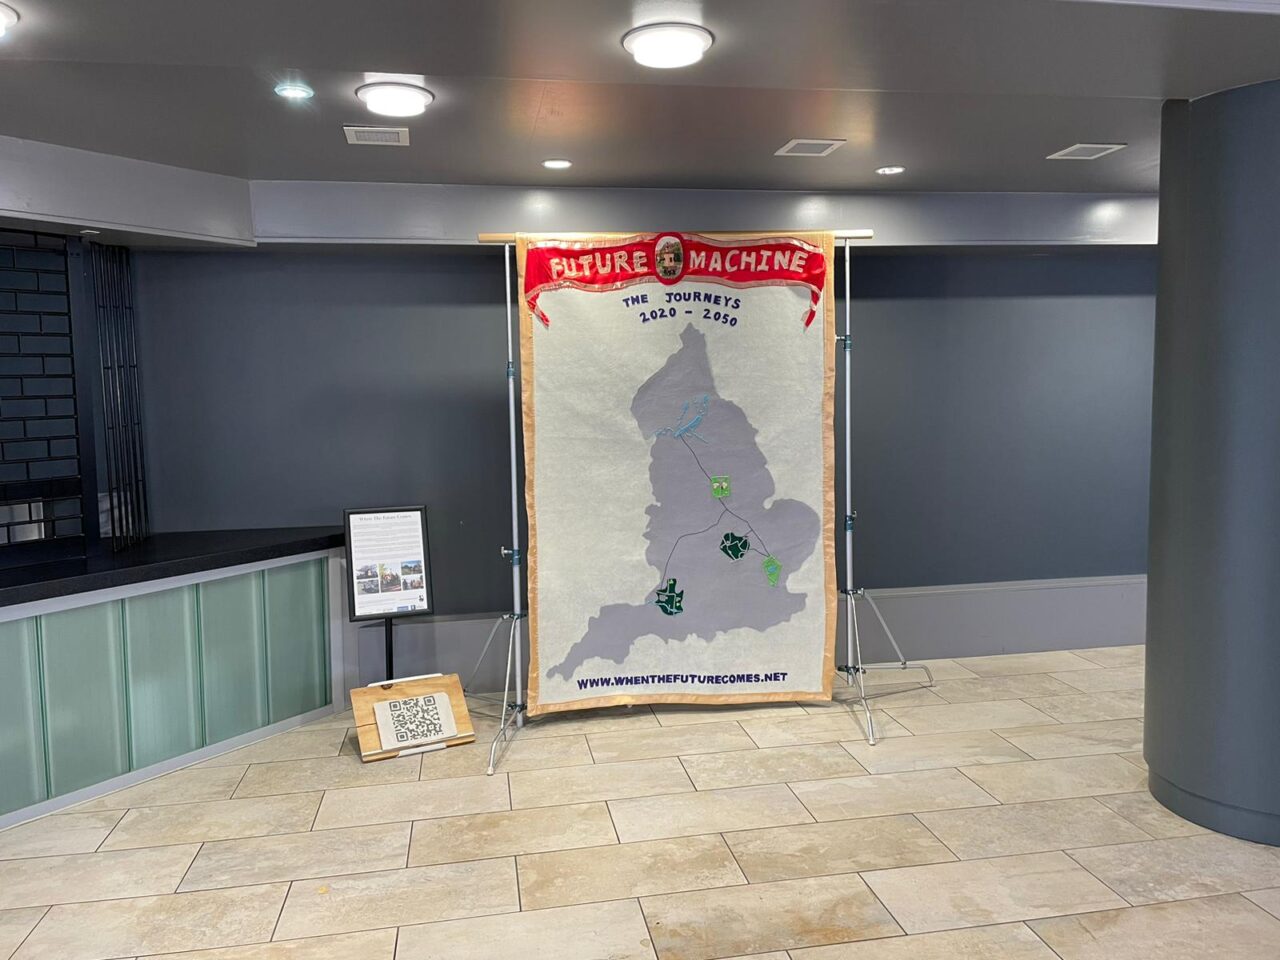 Textile banner with Future Machine the journeys written on it and a large map of England with symbols representing each of the of places where Future Machine appears on its journey, next to the banner is a poster on a stand and on the floor is a a clay QR code